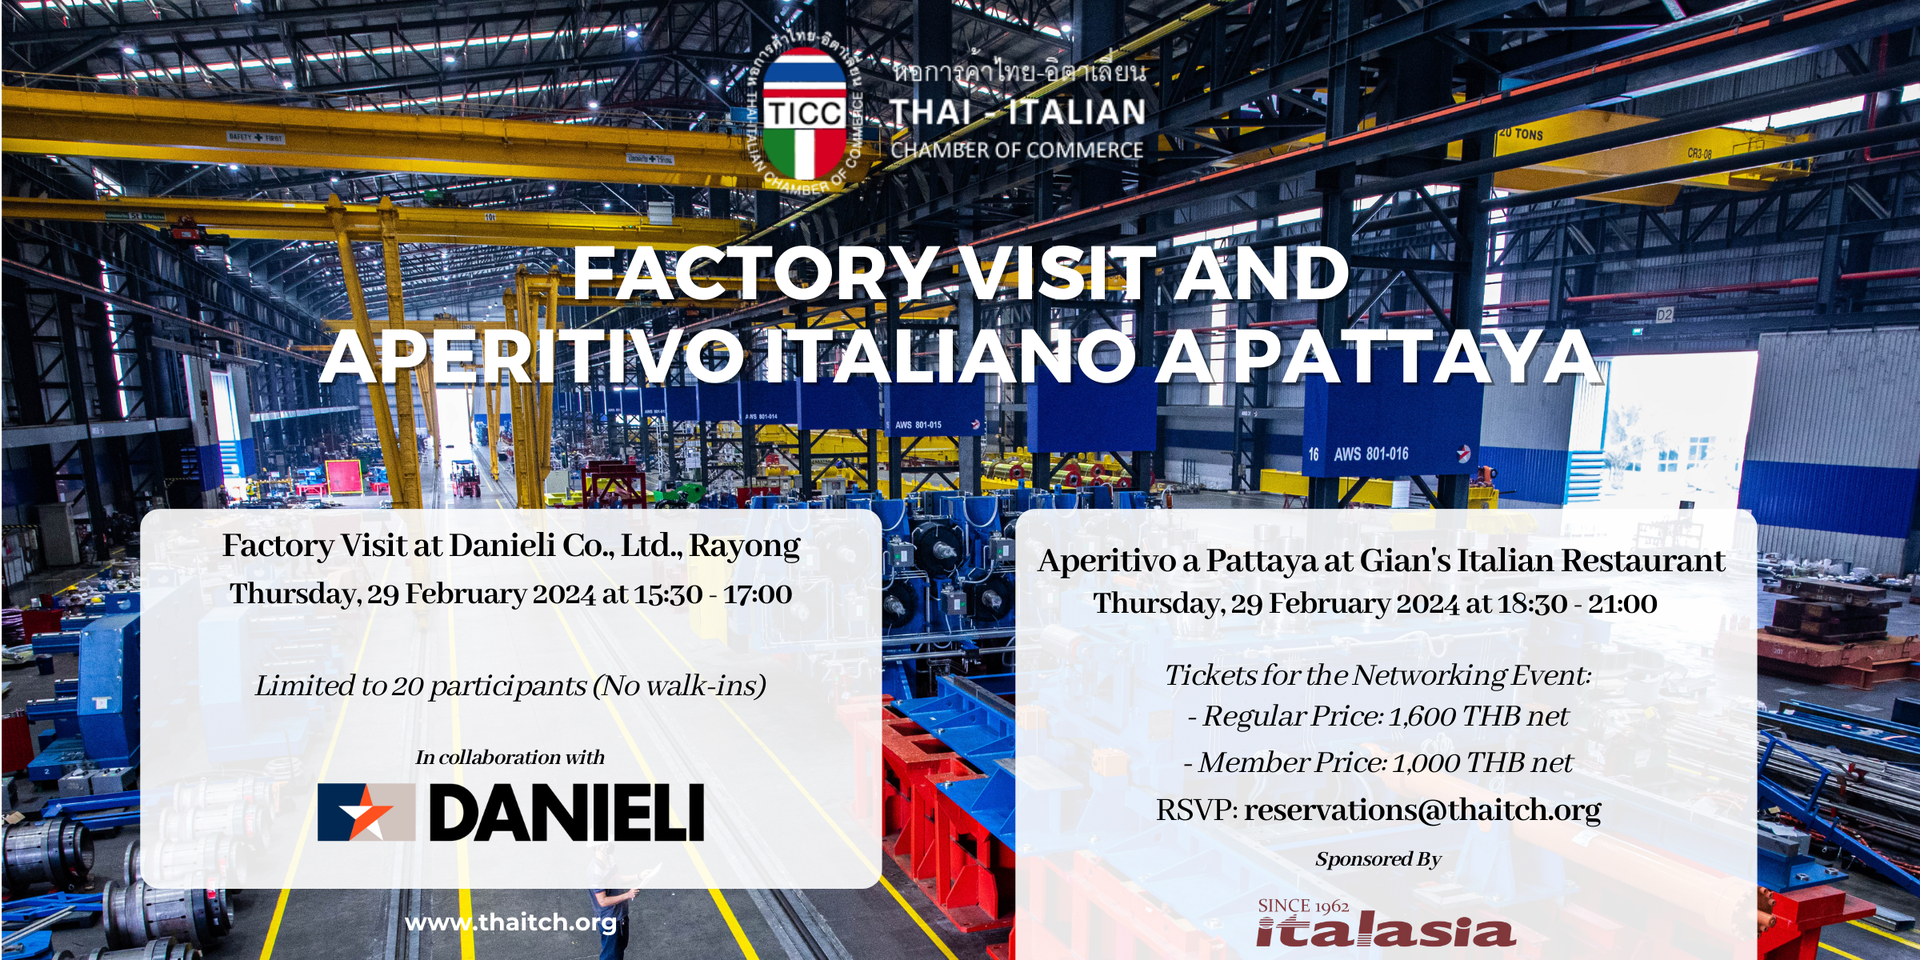 thumbnails TICC Industrial Committee Meeting, Factory Visit and Aperitivo